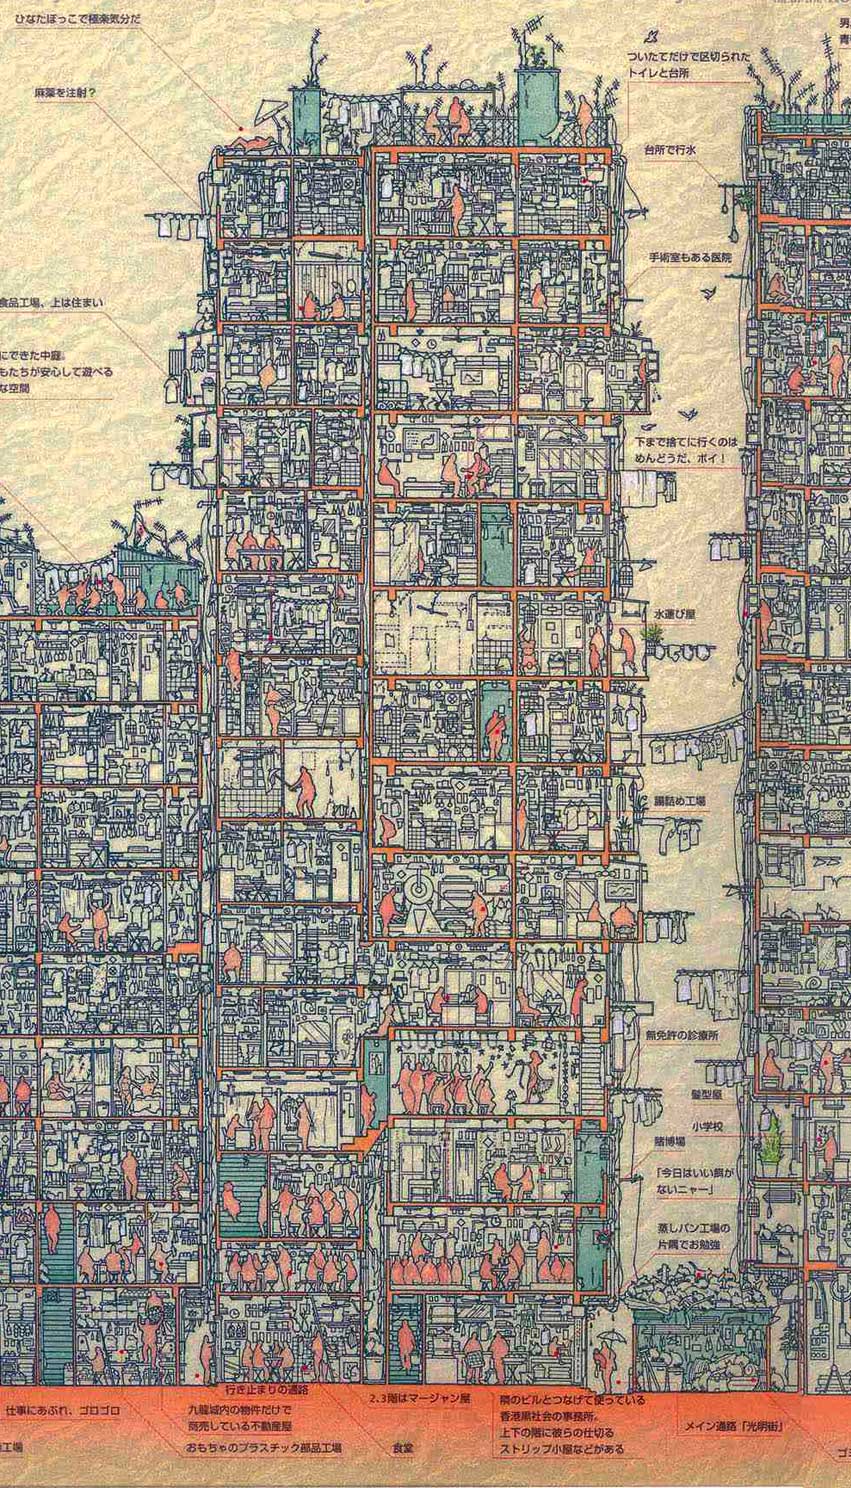 kowloon Walled City cross-section view